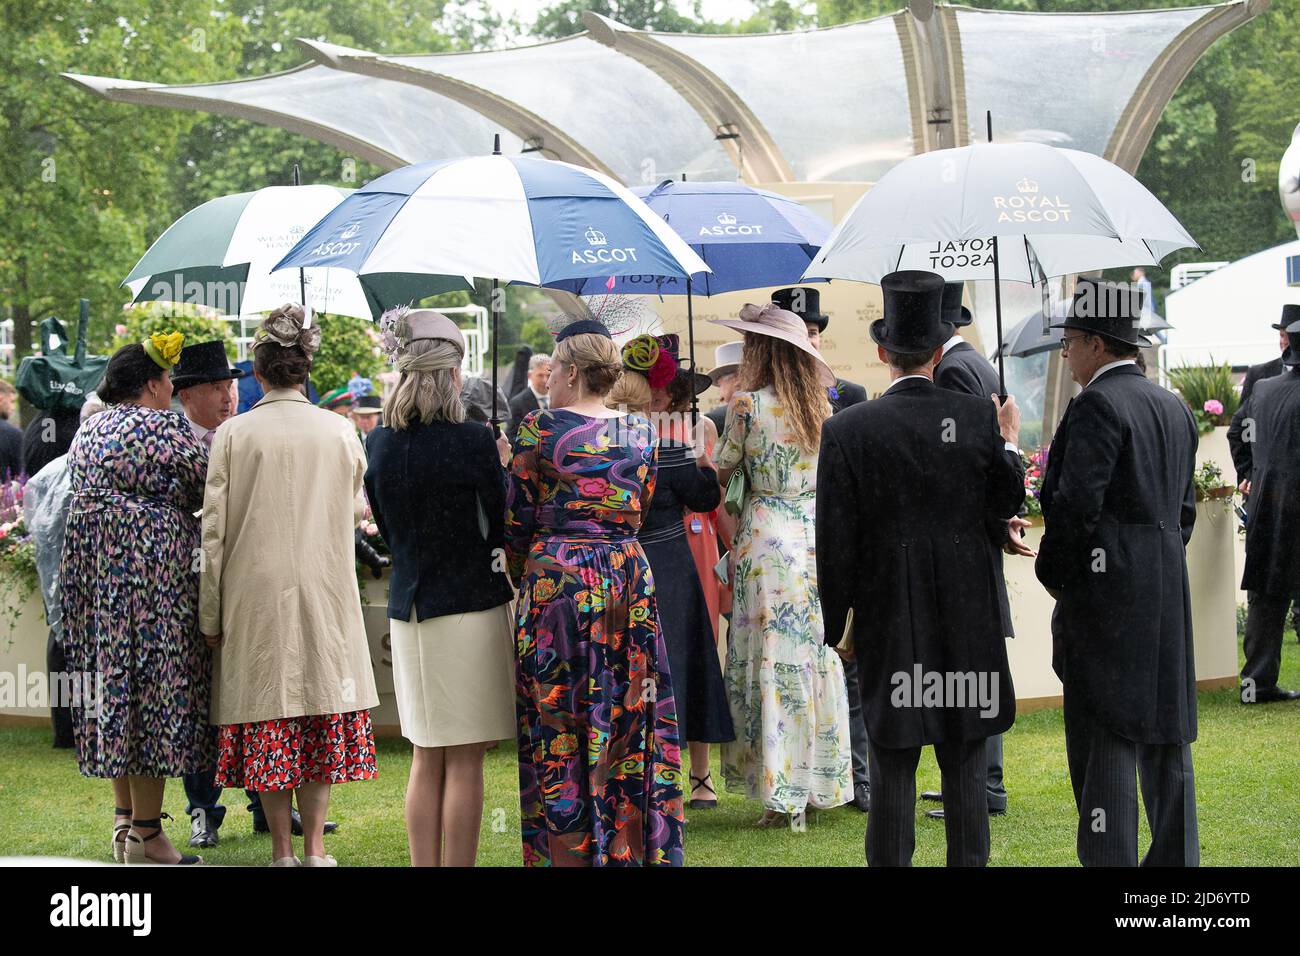 Ascot, Berkshire, UK. 18th June, 2022. The umbrellas were out again this afternoon at Royal Ascot after a few intermittent showers. Credit: Maureen McLean/Alamy Live News Stock Photo